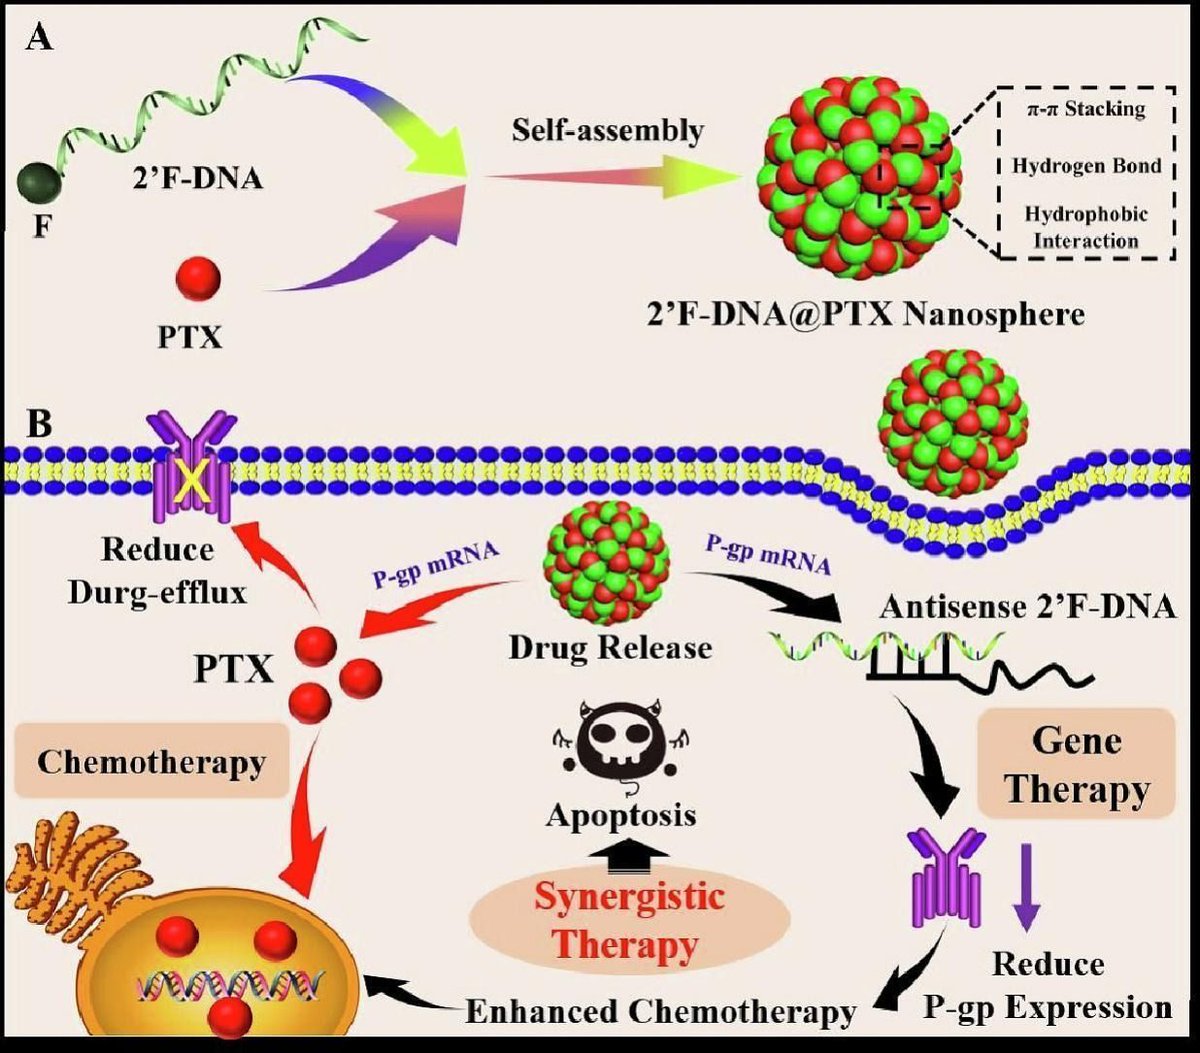 #Chemotherapy and #GeneTherapy synergy promise tumor eradication. This study developed mRNA-responsive 2-in-1 nano-drug combining 2′F-DNA and paclitaxel, enhancing efficacy and reducing resistance. #NanoMedicine. Daily biotech insights 👉🏼 @gathersight. buff.ly/49IYxVG